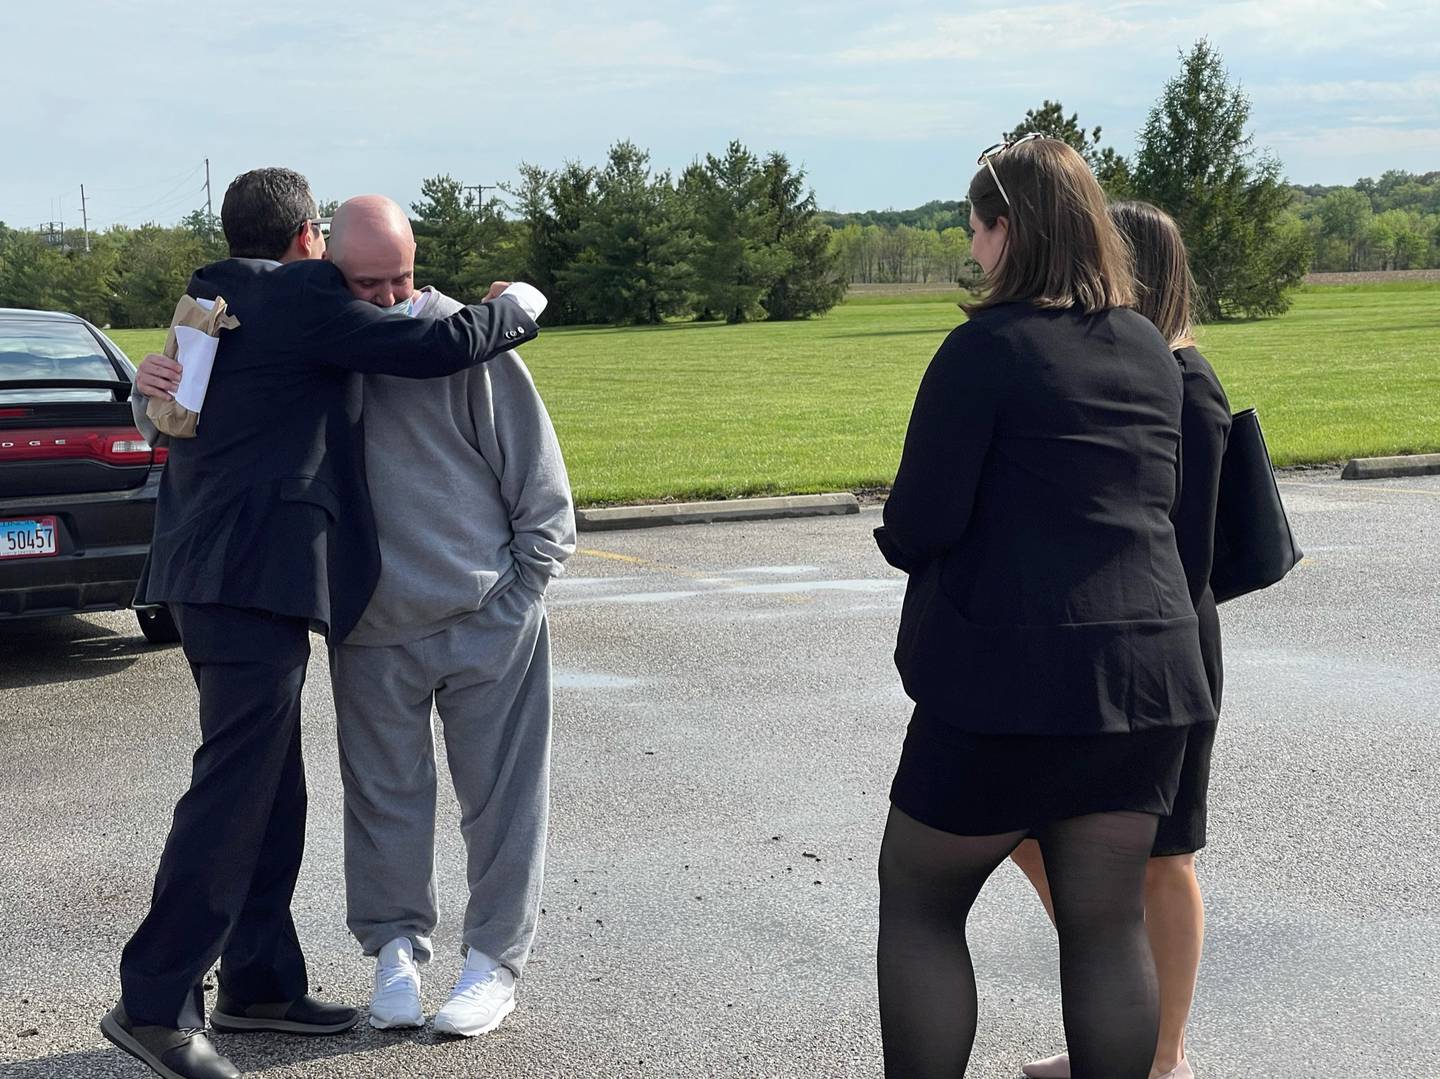 Kenneth Smith, 45, and attorney David Jimenez-Ekman  hug after walking out of Lawrence Correctional Center in Sumner on Thursday, May 6, 2021. Smith served nearly 20 years for the 2001 murder of Raul Briseno.